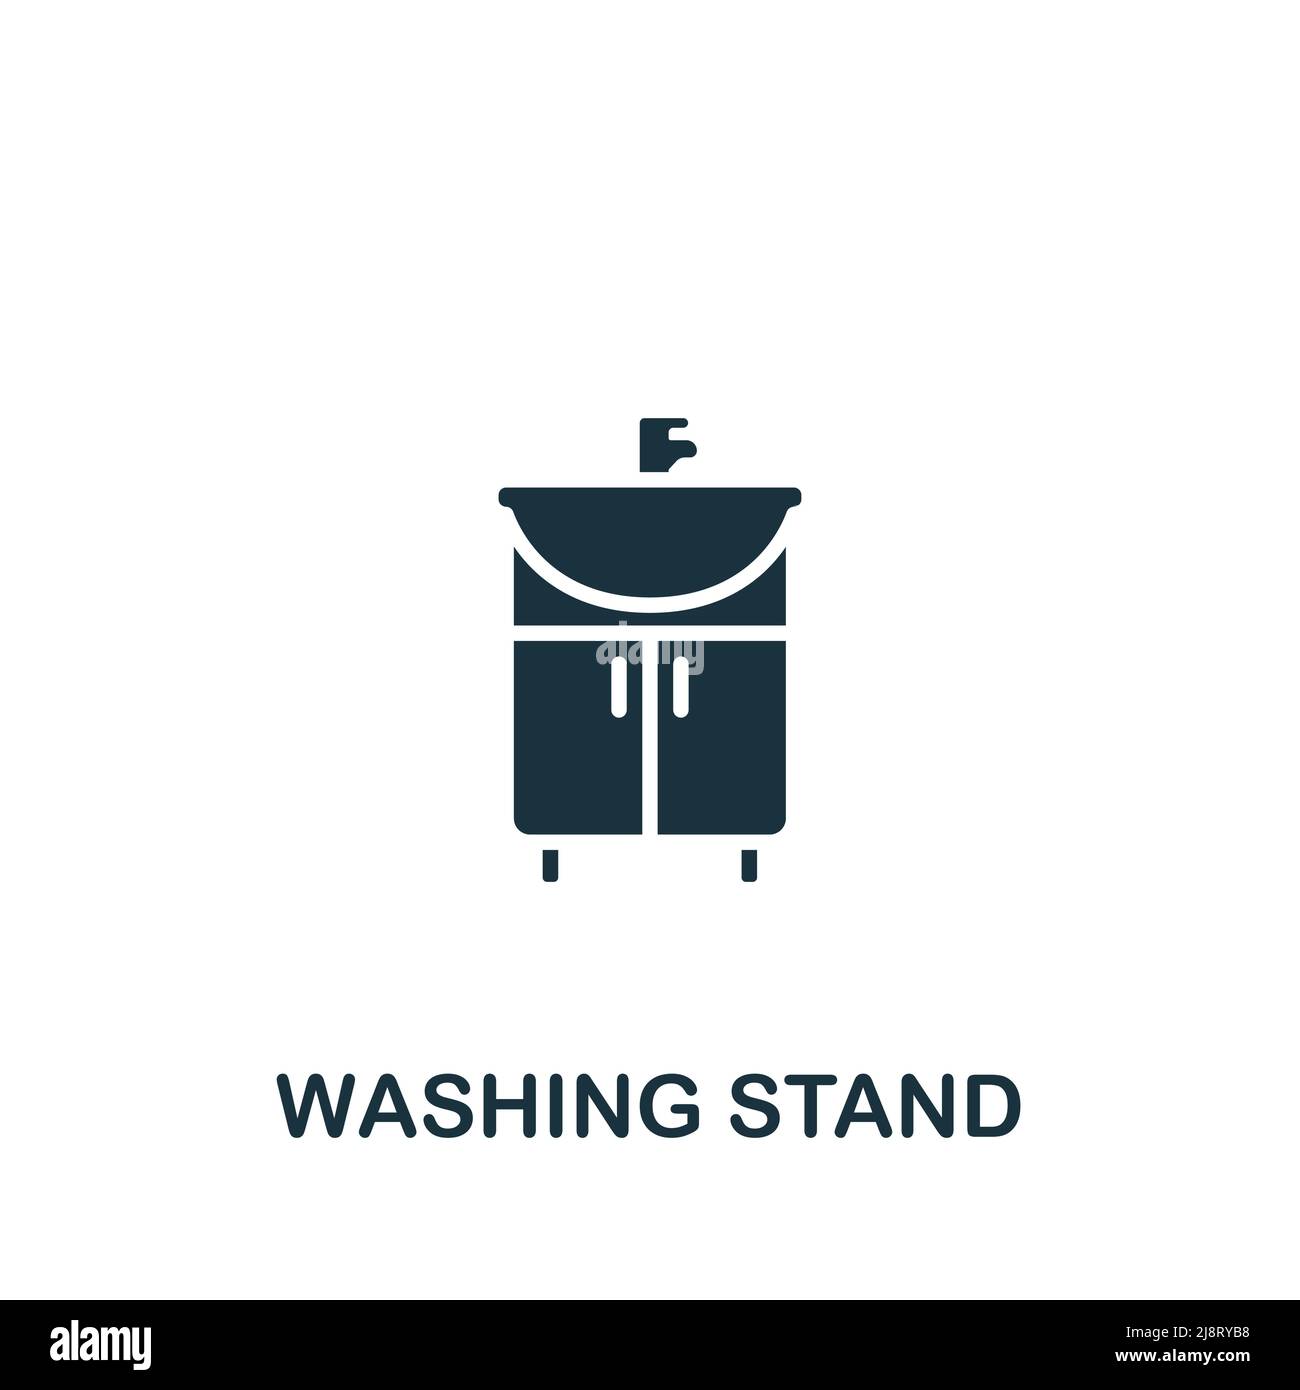 Washing Stand icon. Monochrome simple Interior Furniture icon for templates, web design and infographics Stock Vector